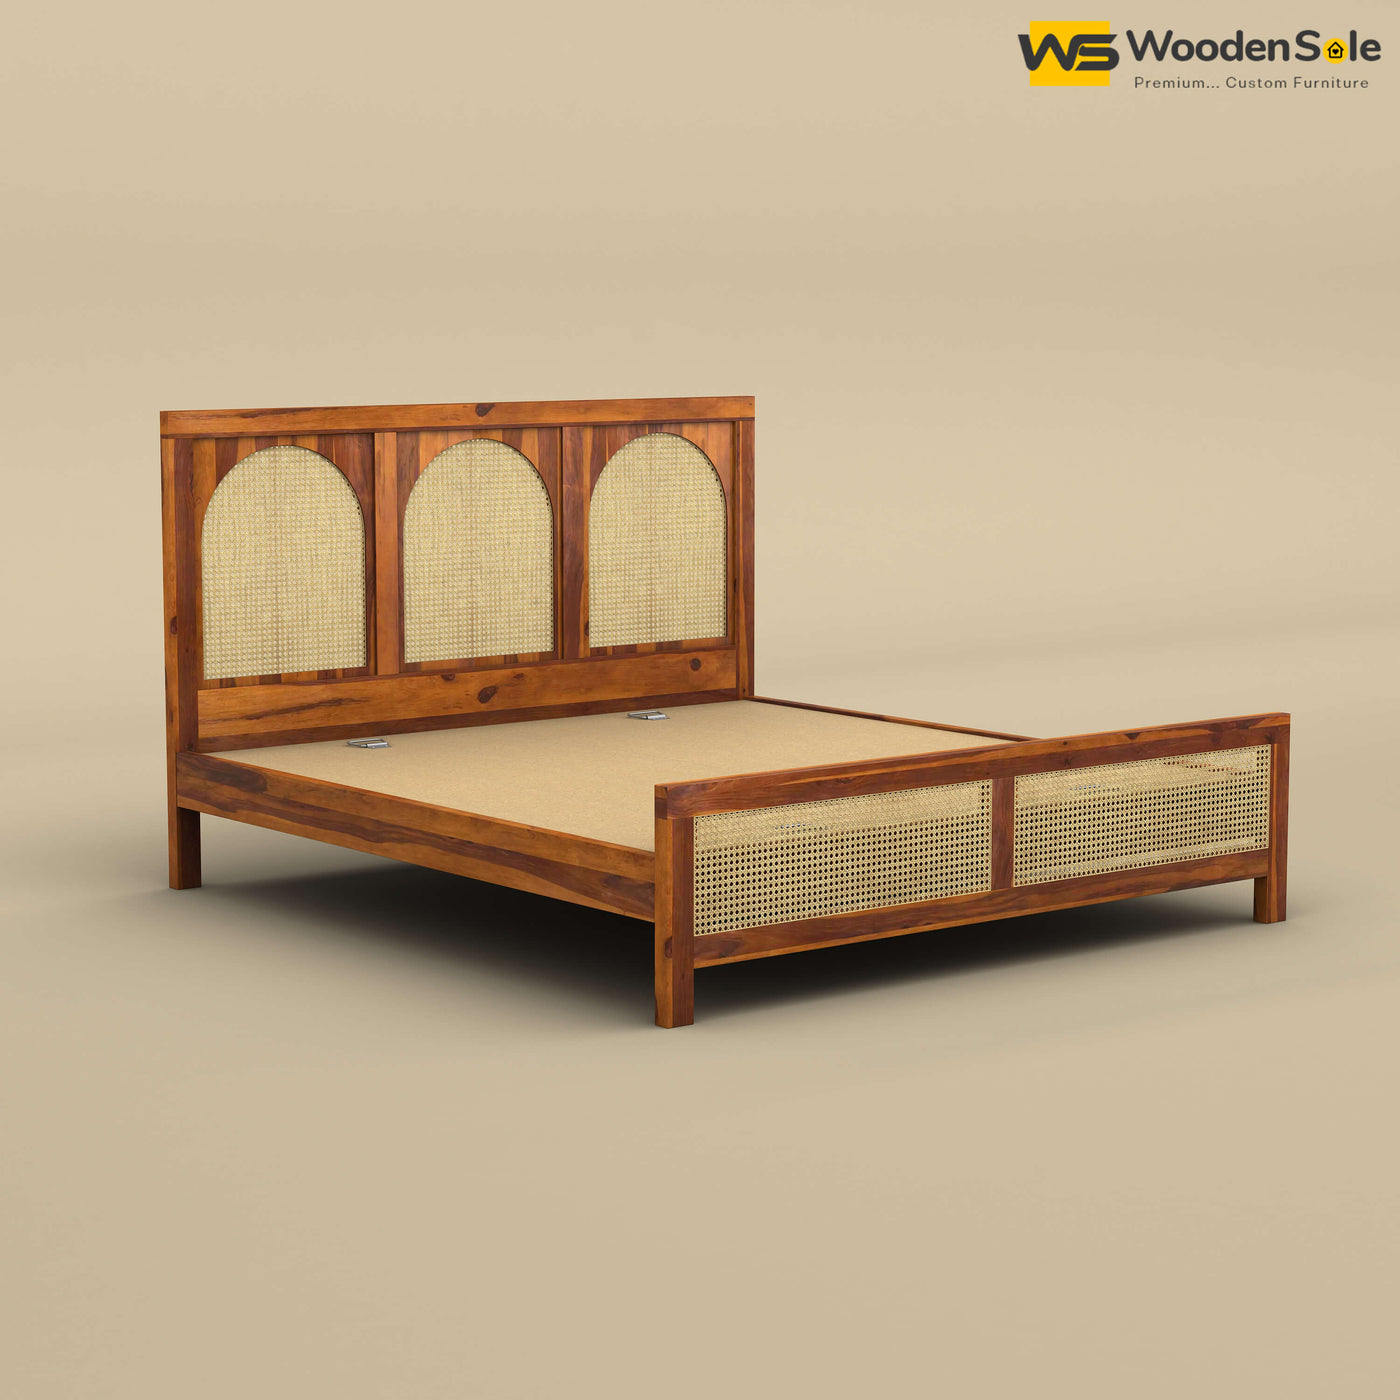 Wooden Rattan Cane Bed (King Size, Honey Finish)